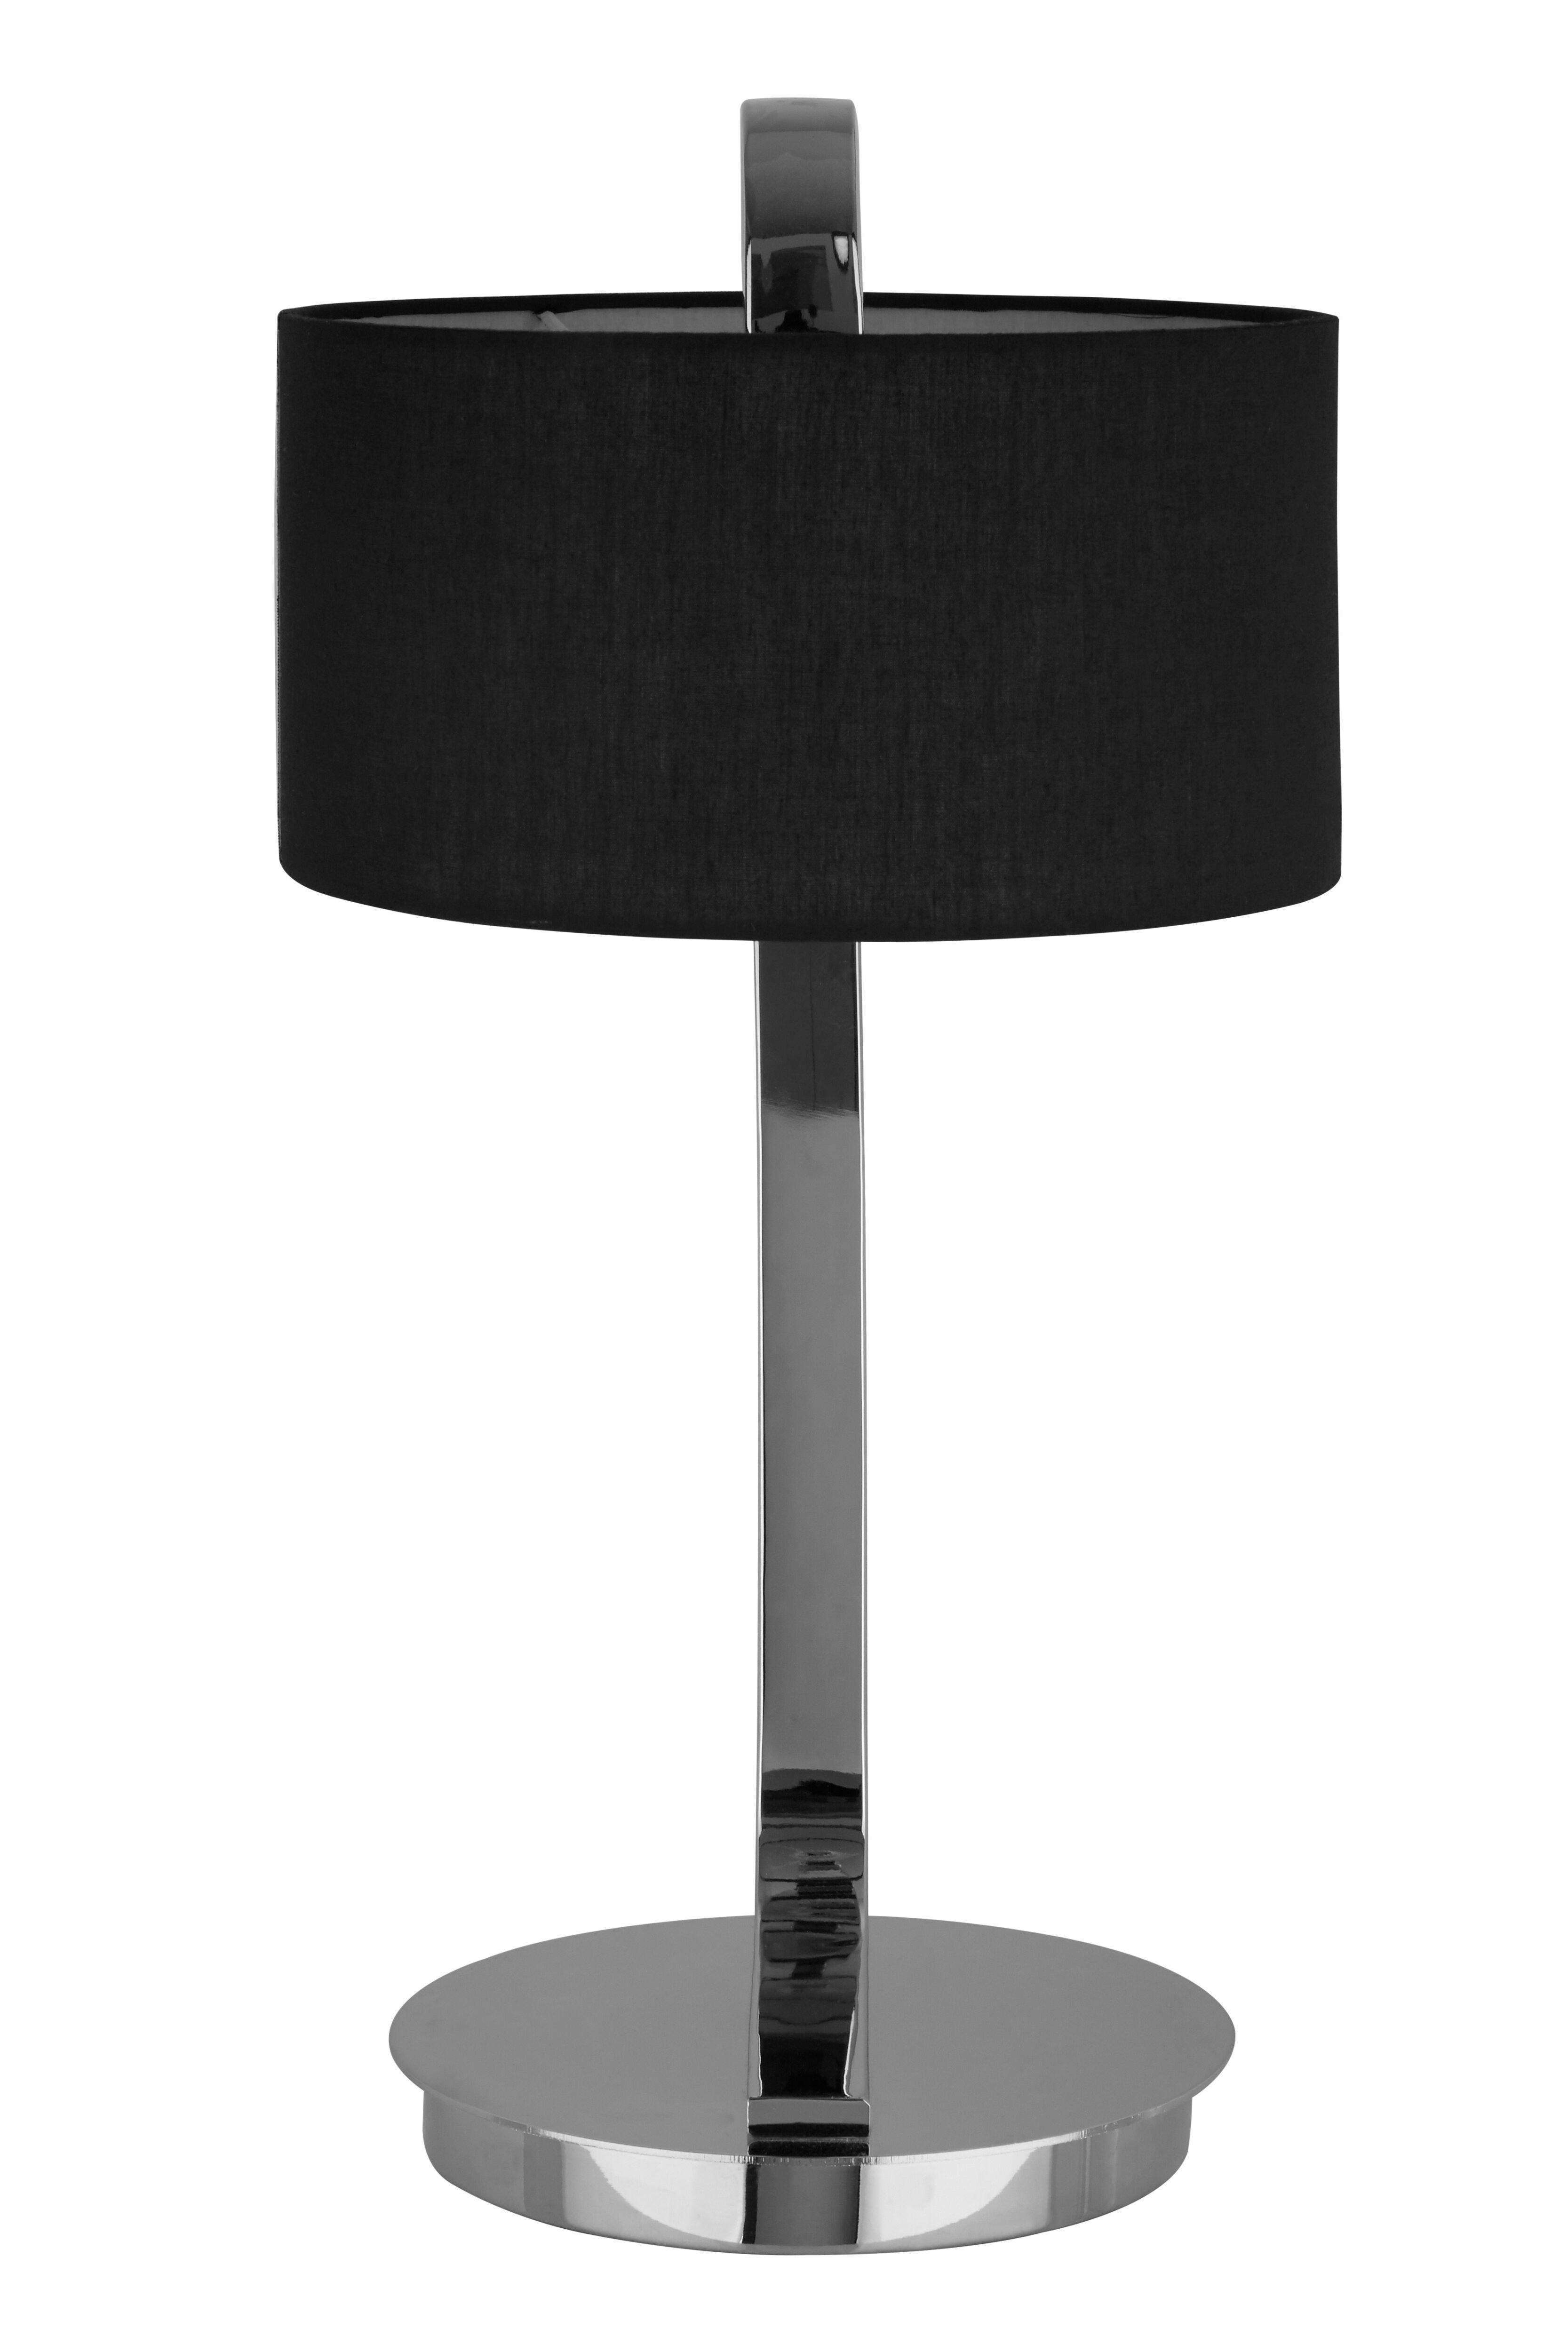 Interiors by Premier Leyna Black and Chrome Table Lamp